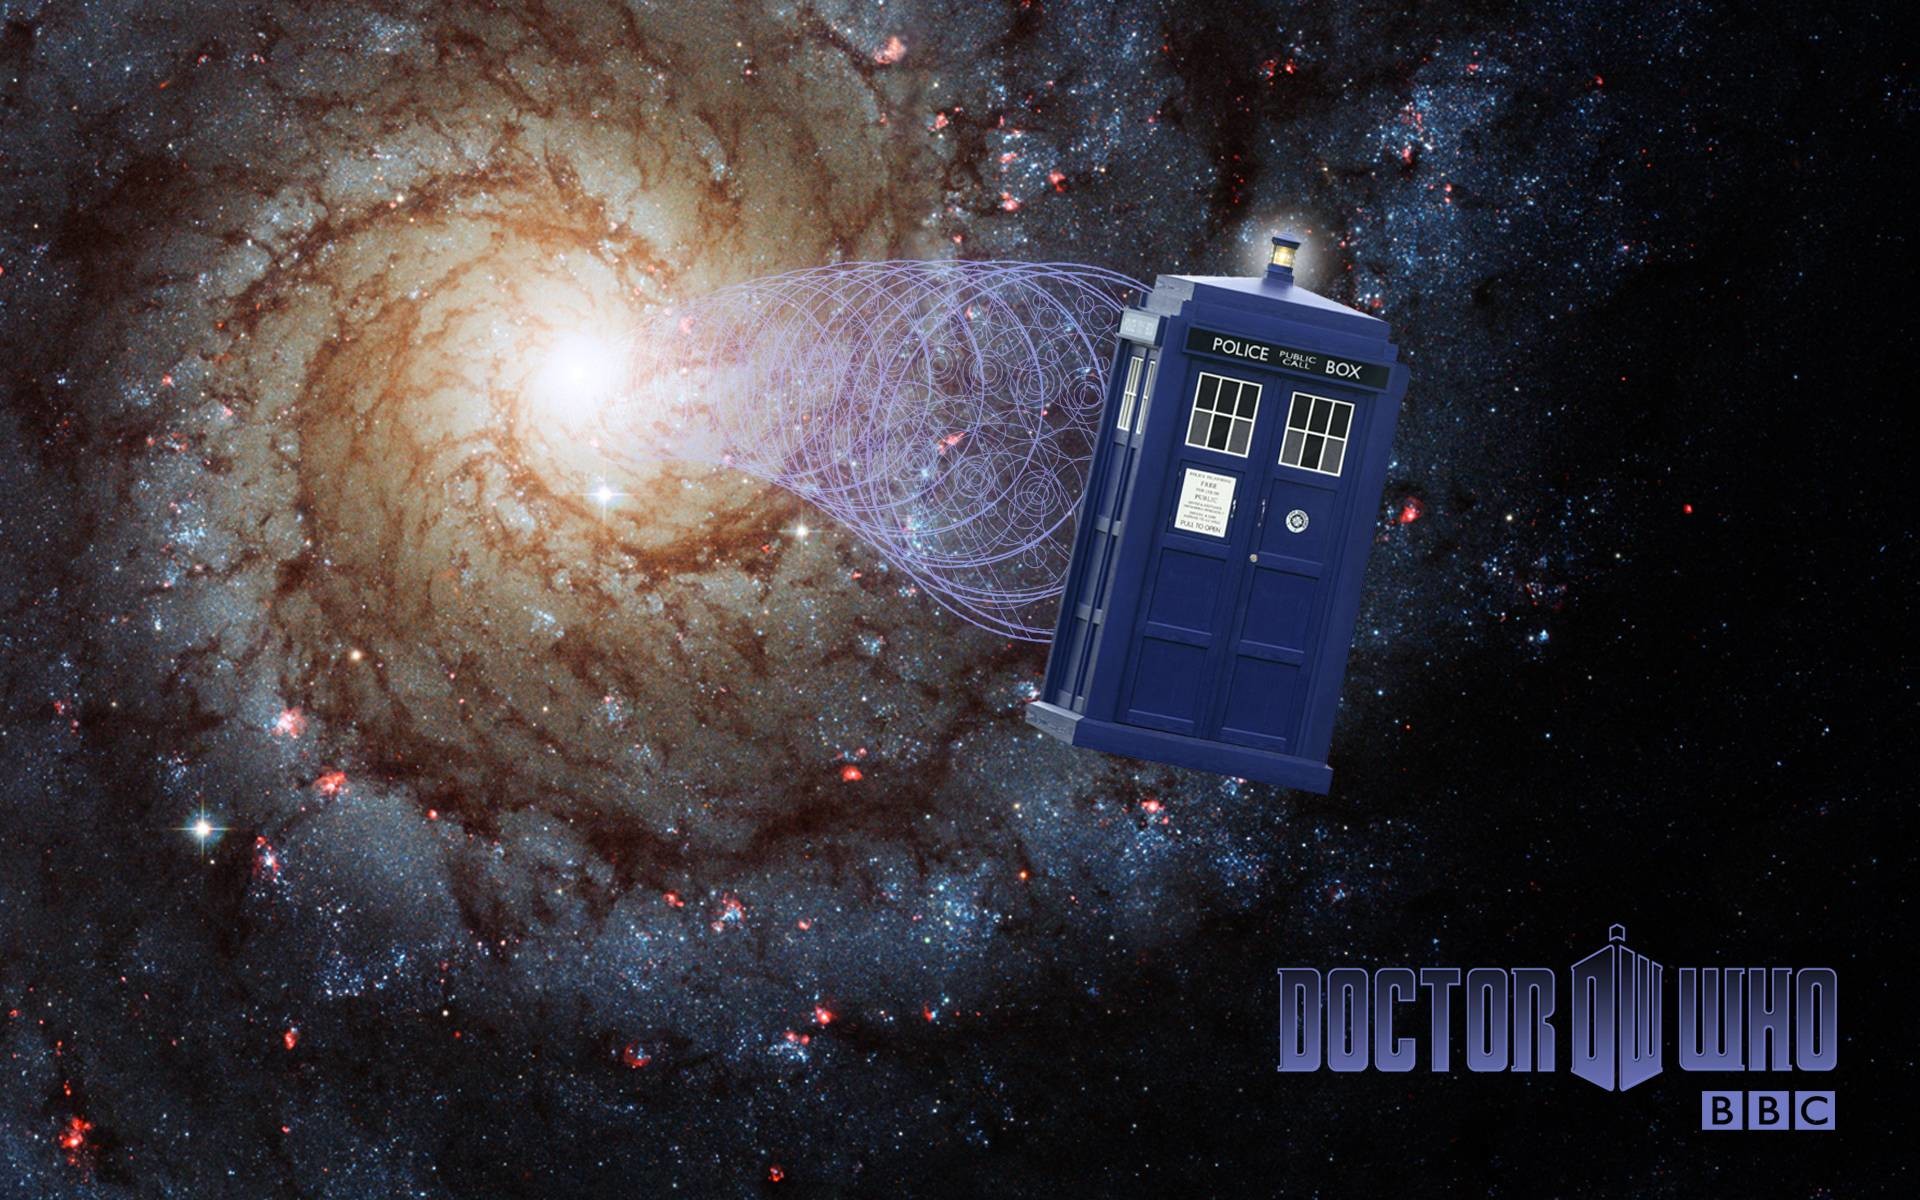 Doctor-Who-Wallpapers-Tardis doctor who wallpaper HD free .